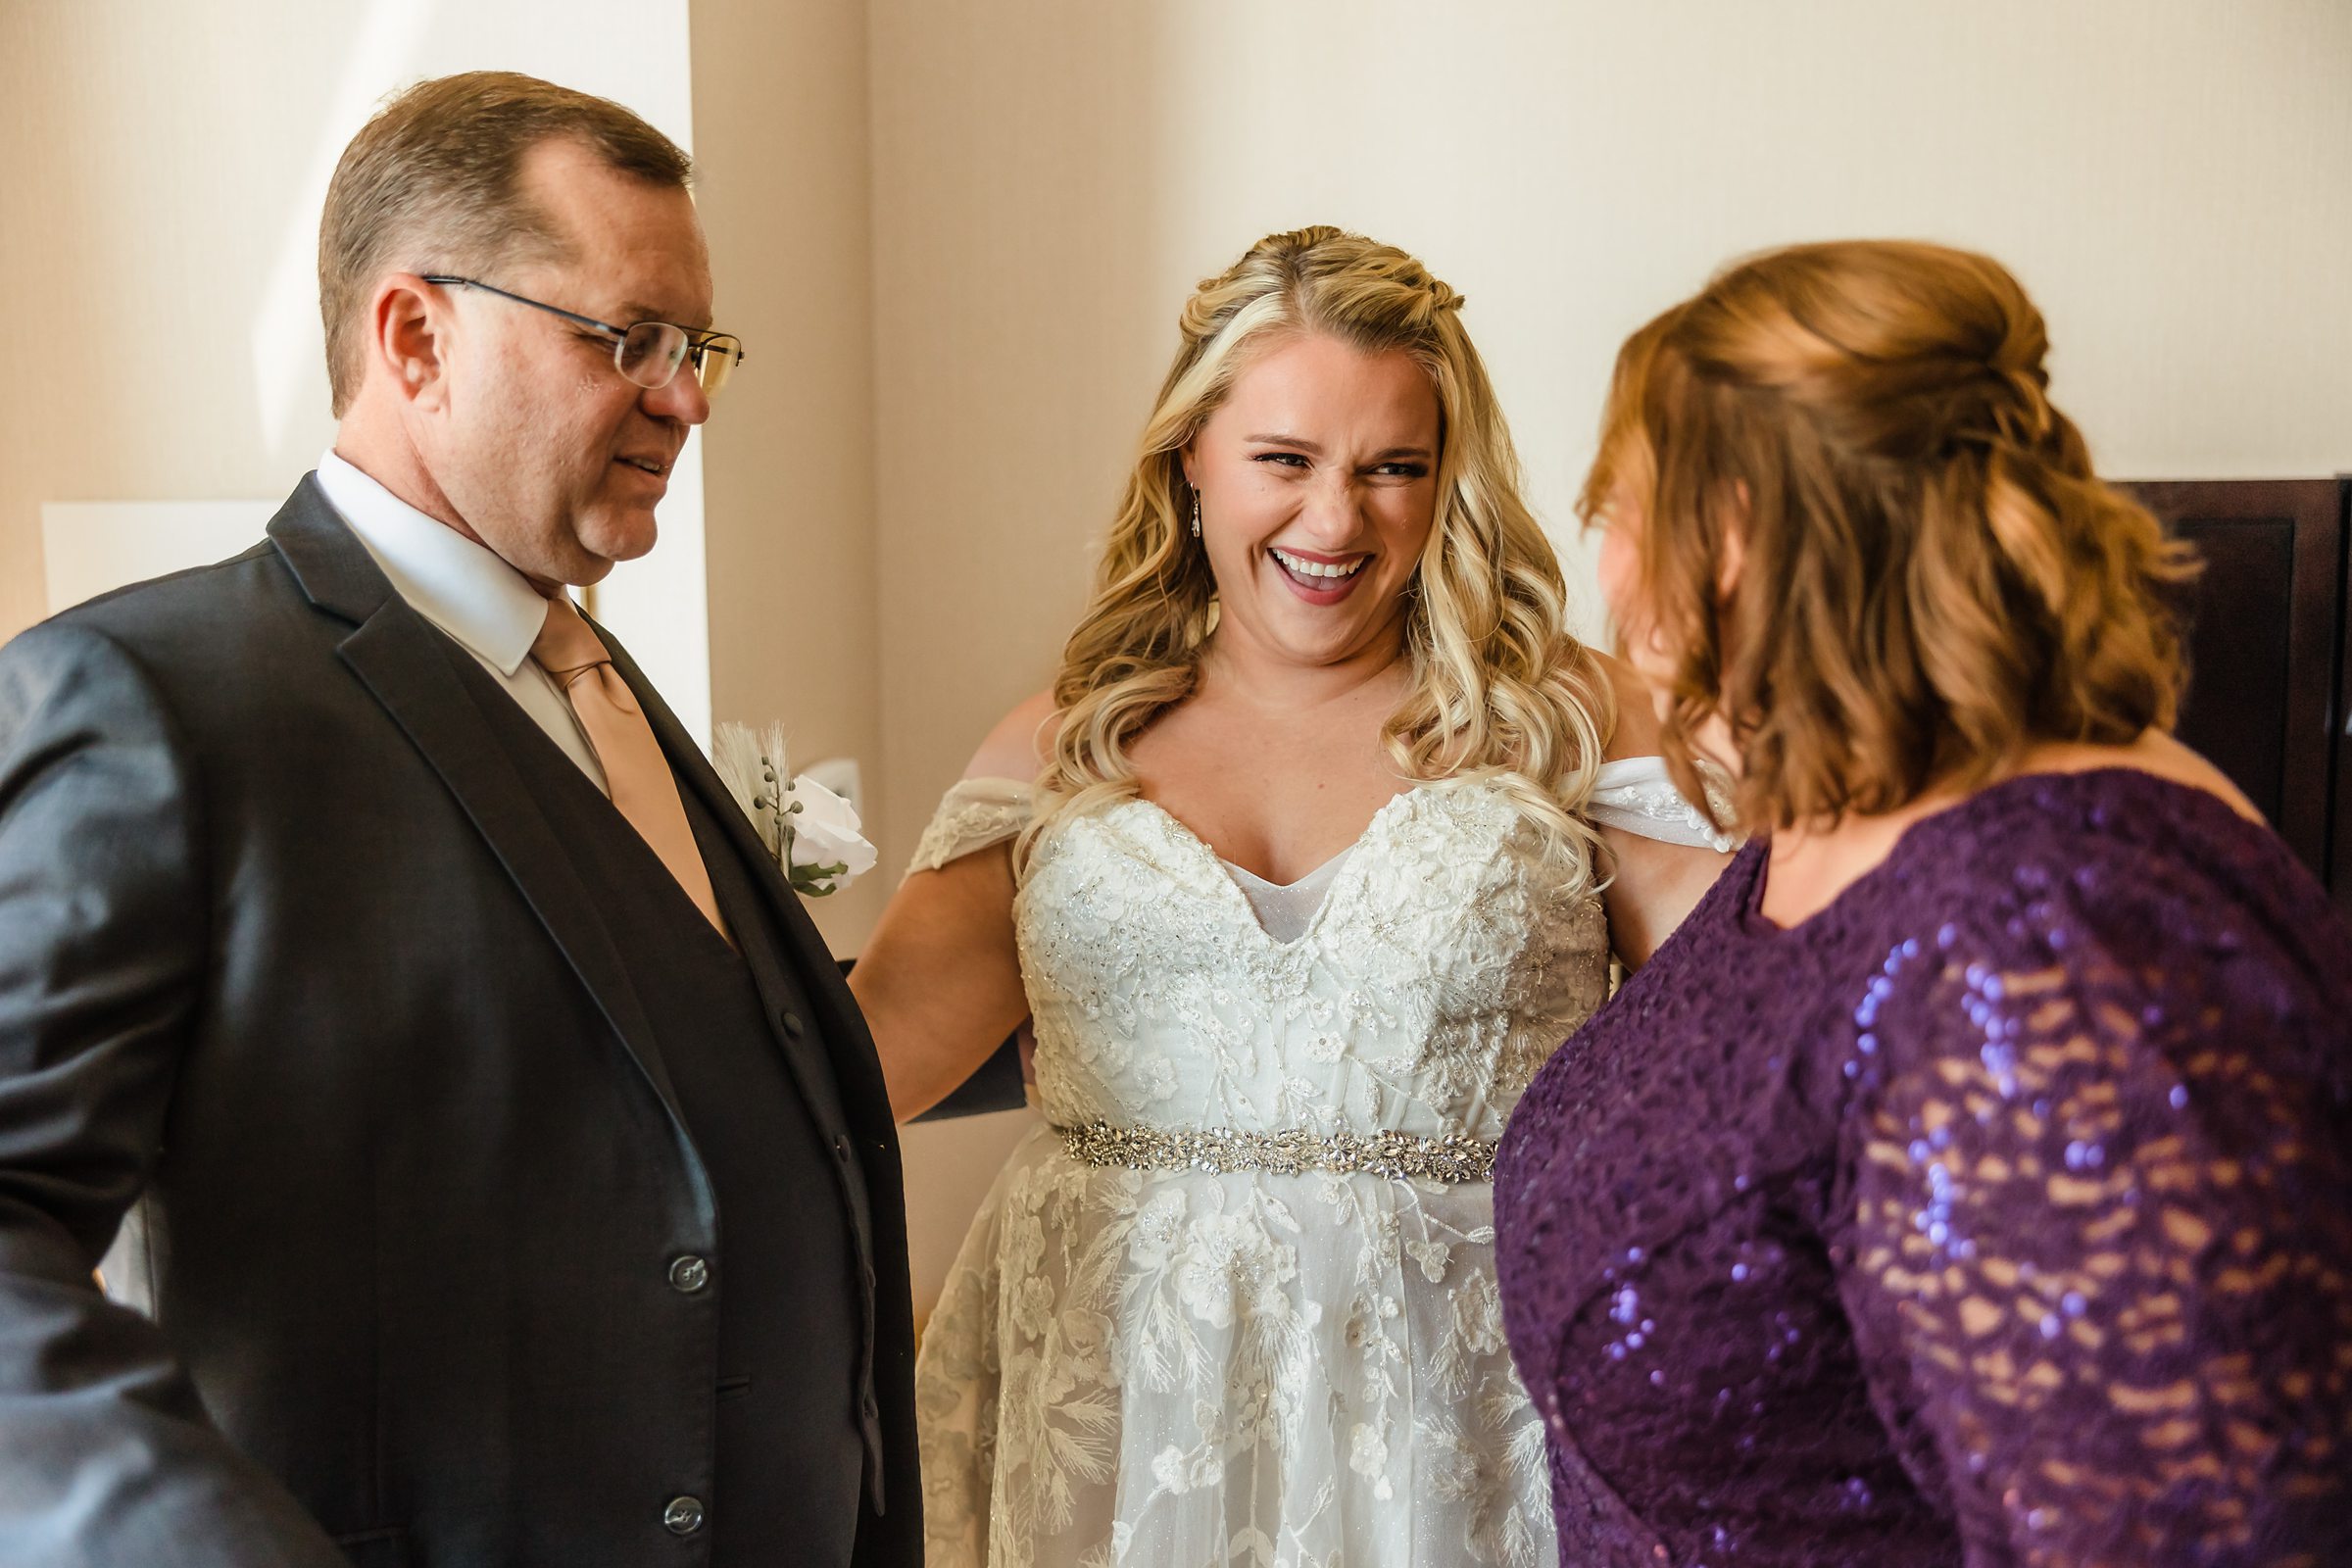 Bride celebrates with her family during her wedding at the Destihl Brewery in Normal, Illinois.